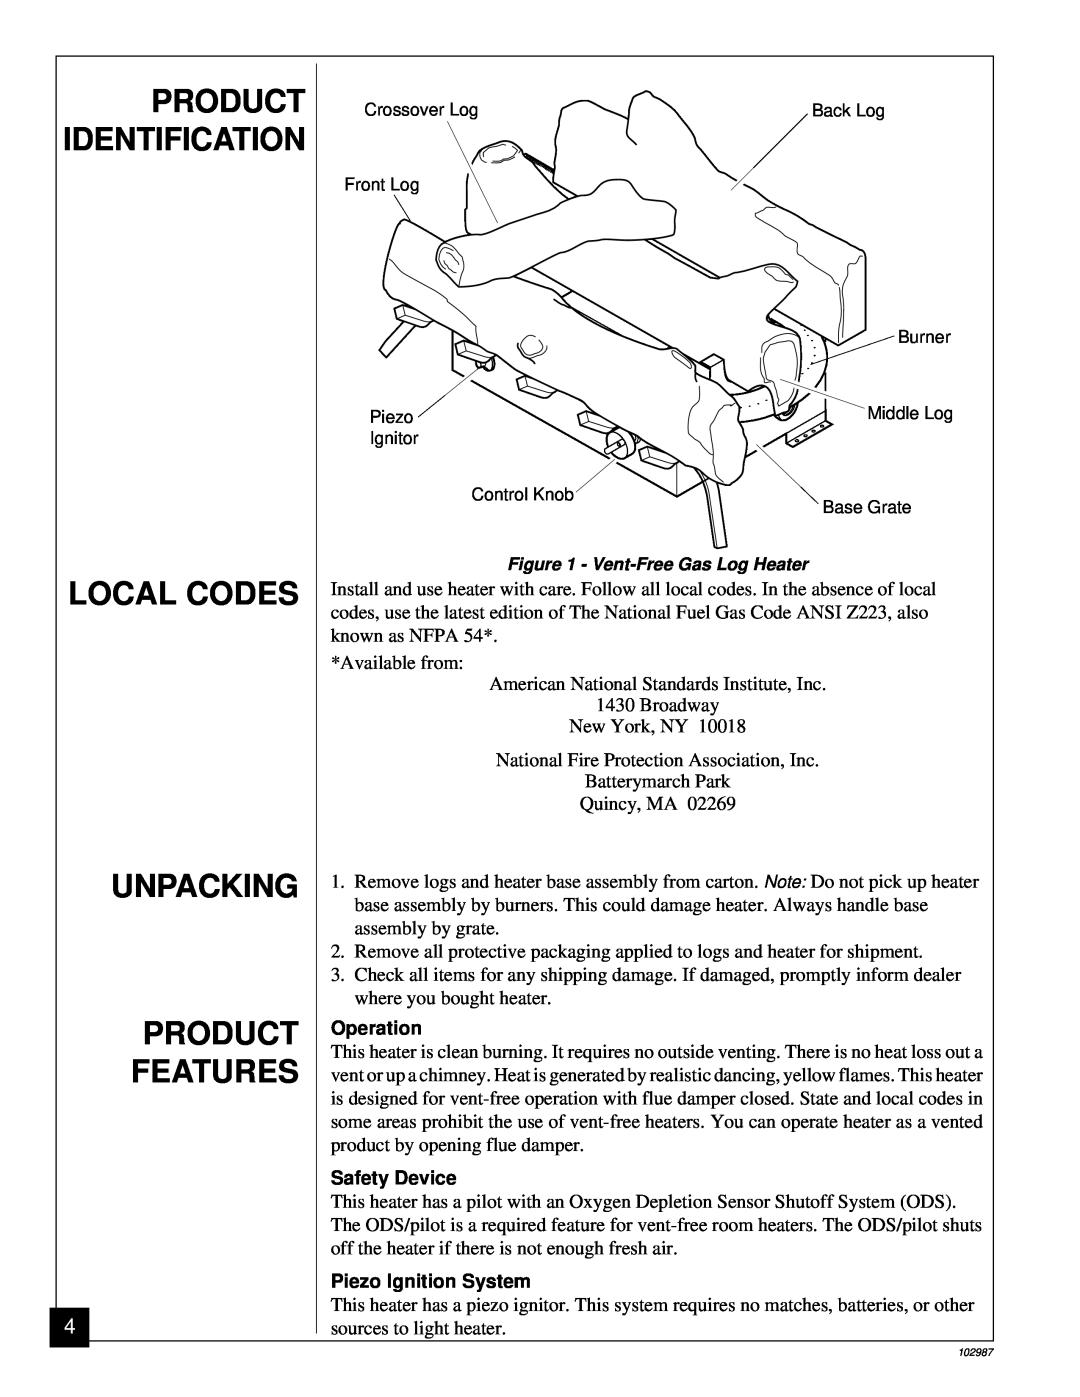 Desa CGD3018P installation manual Local Codes Unpacking Product Features, Product Identification 